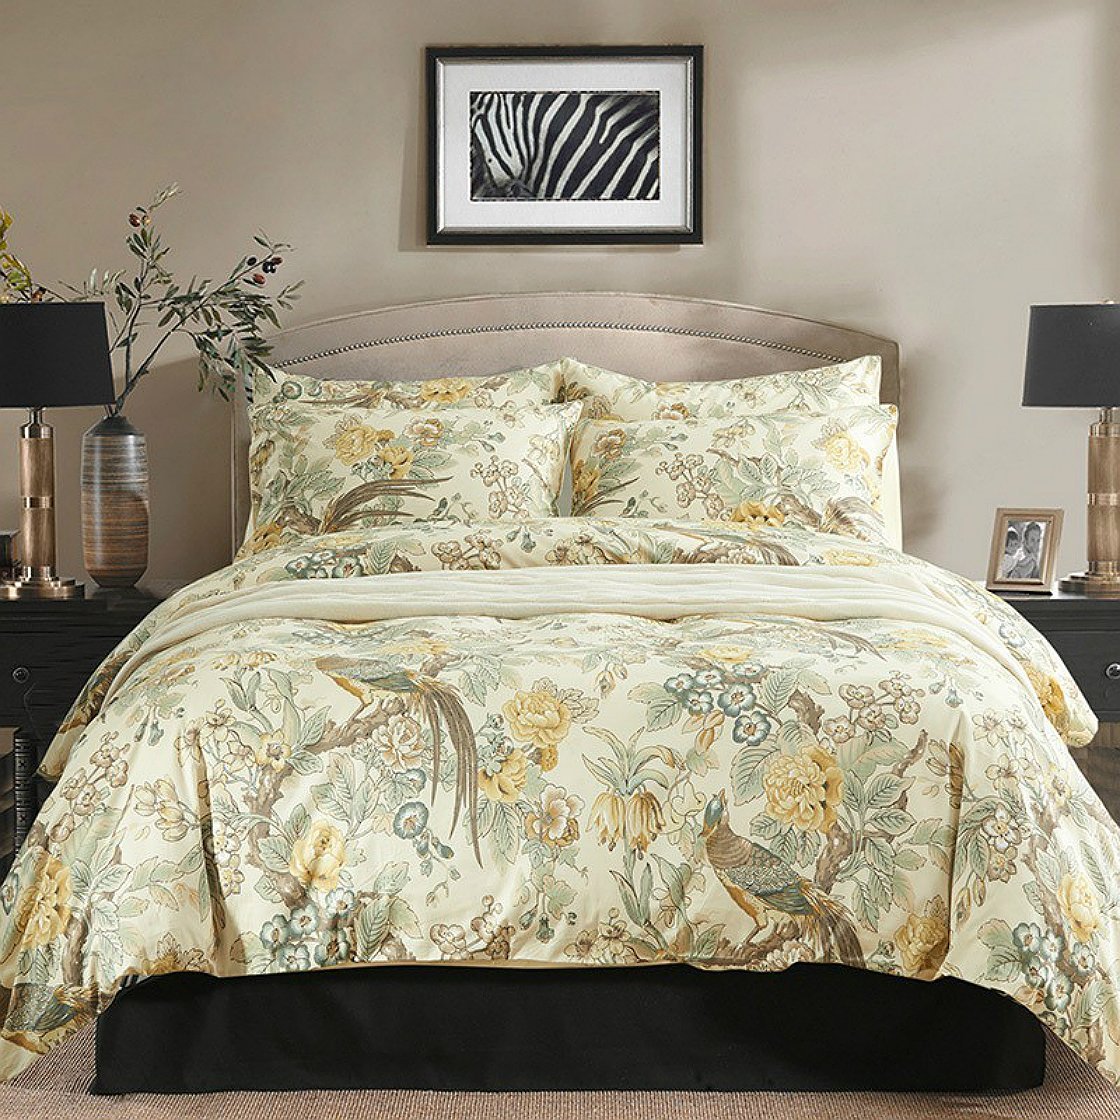 Chinoiserie Chic Peacock Floral Duvet Cover Paradise Garden Botanical Bird  and Tree Branches Vintage Bedding Set Muted Yellow